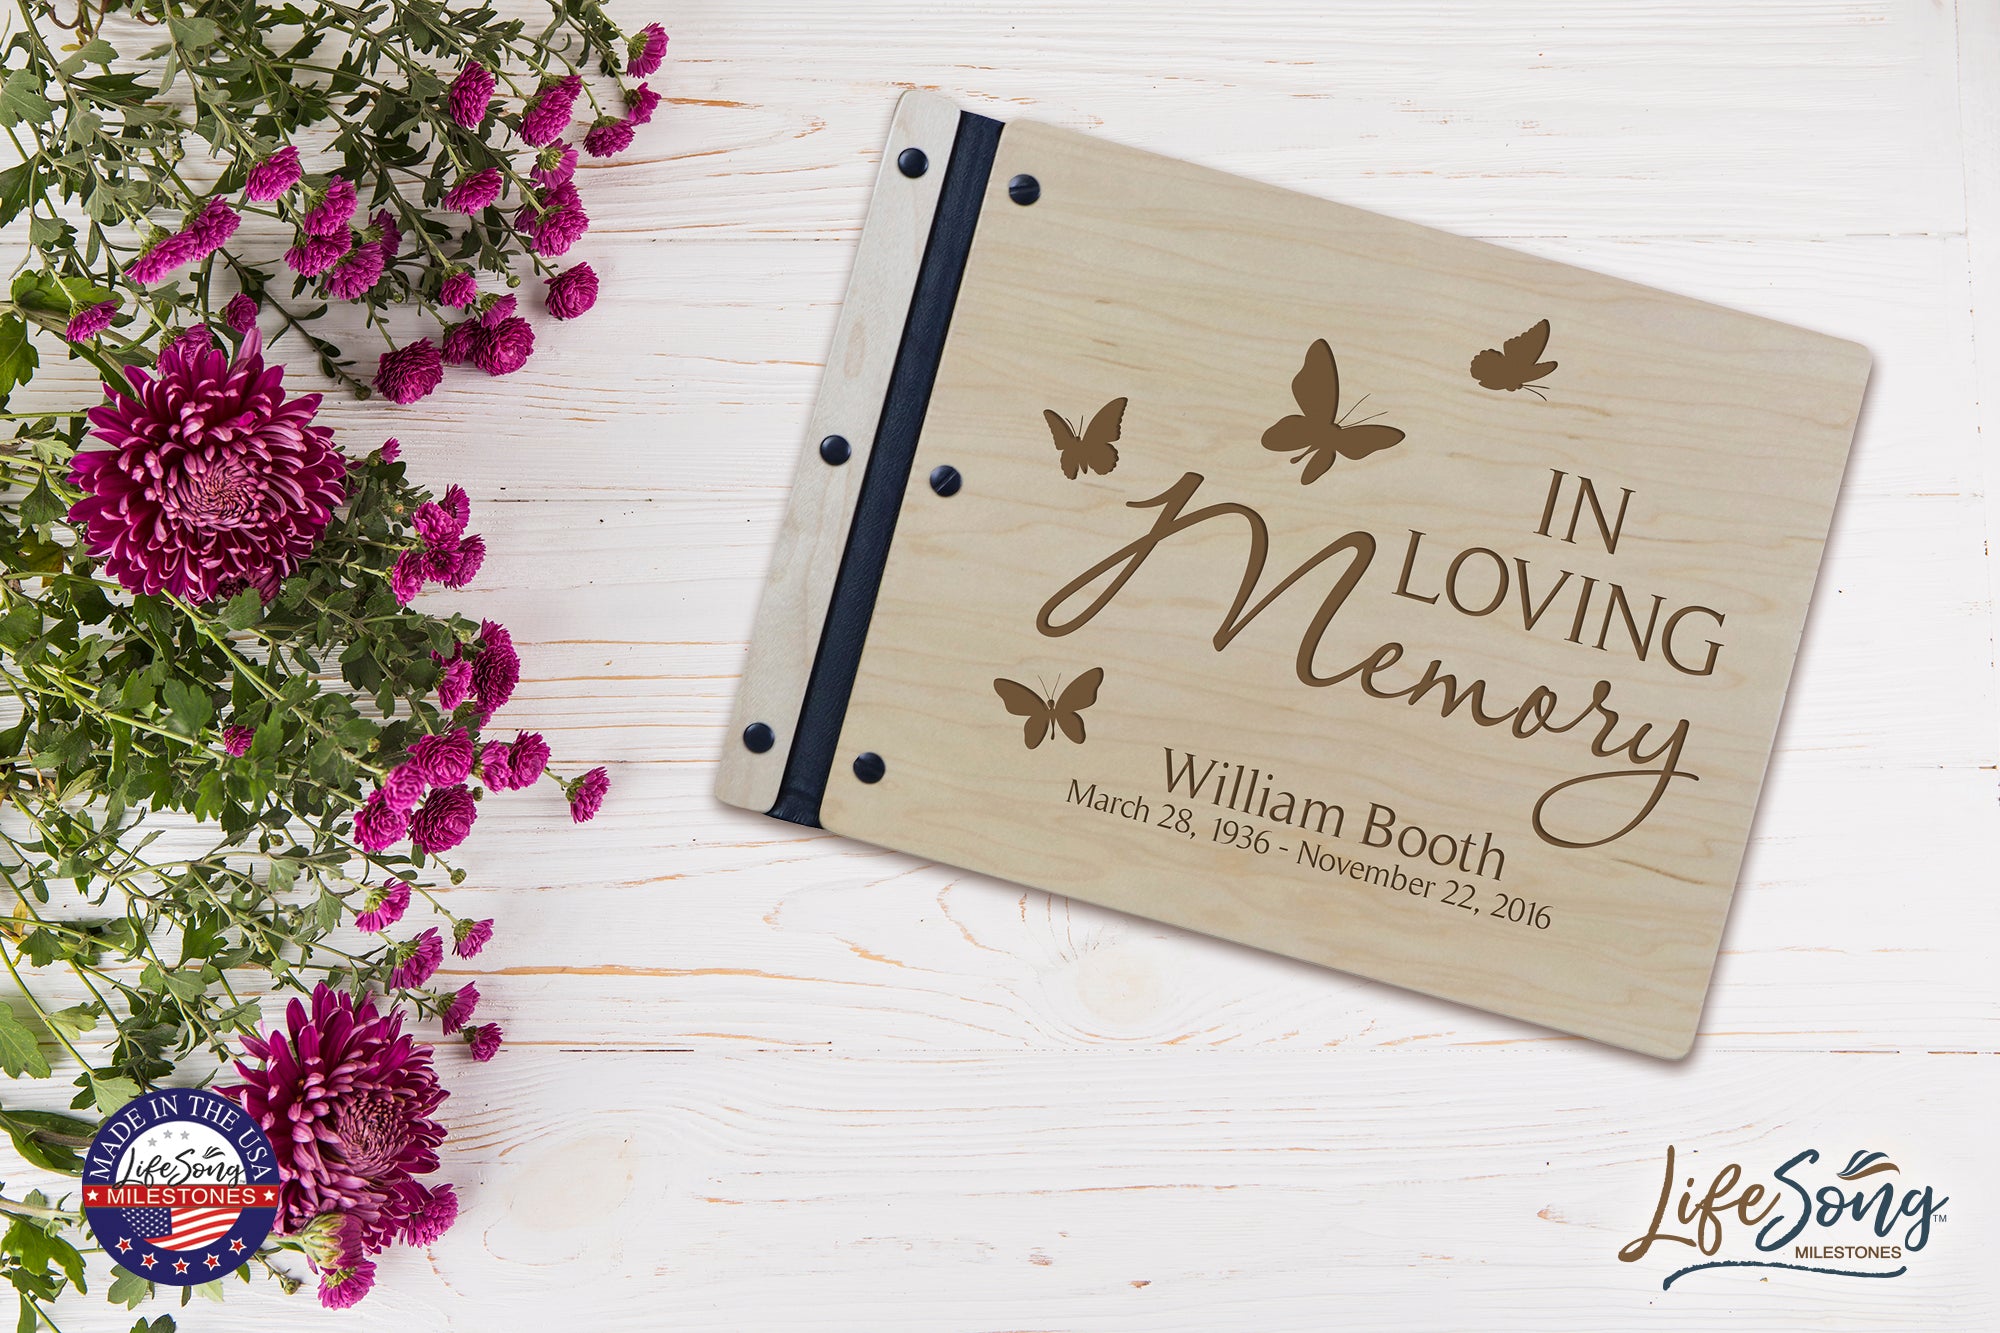 Lifesong Milestones Funeral Guest Book Personalized Wooden Memorial Guestbook Celebration of Life Guest Book Remembrance In Loving Memory Keepsake 13.375” x 10” x .75”-In Loving Memory